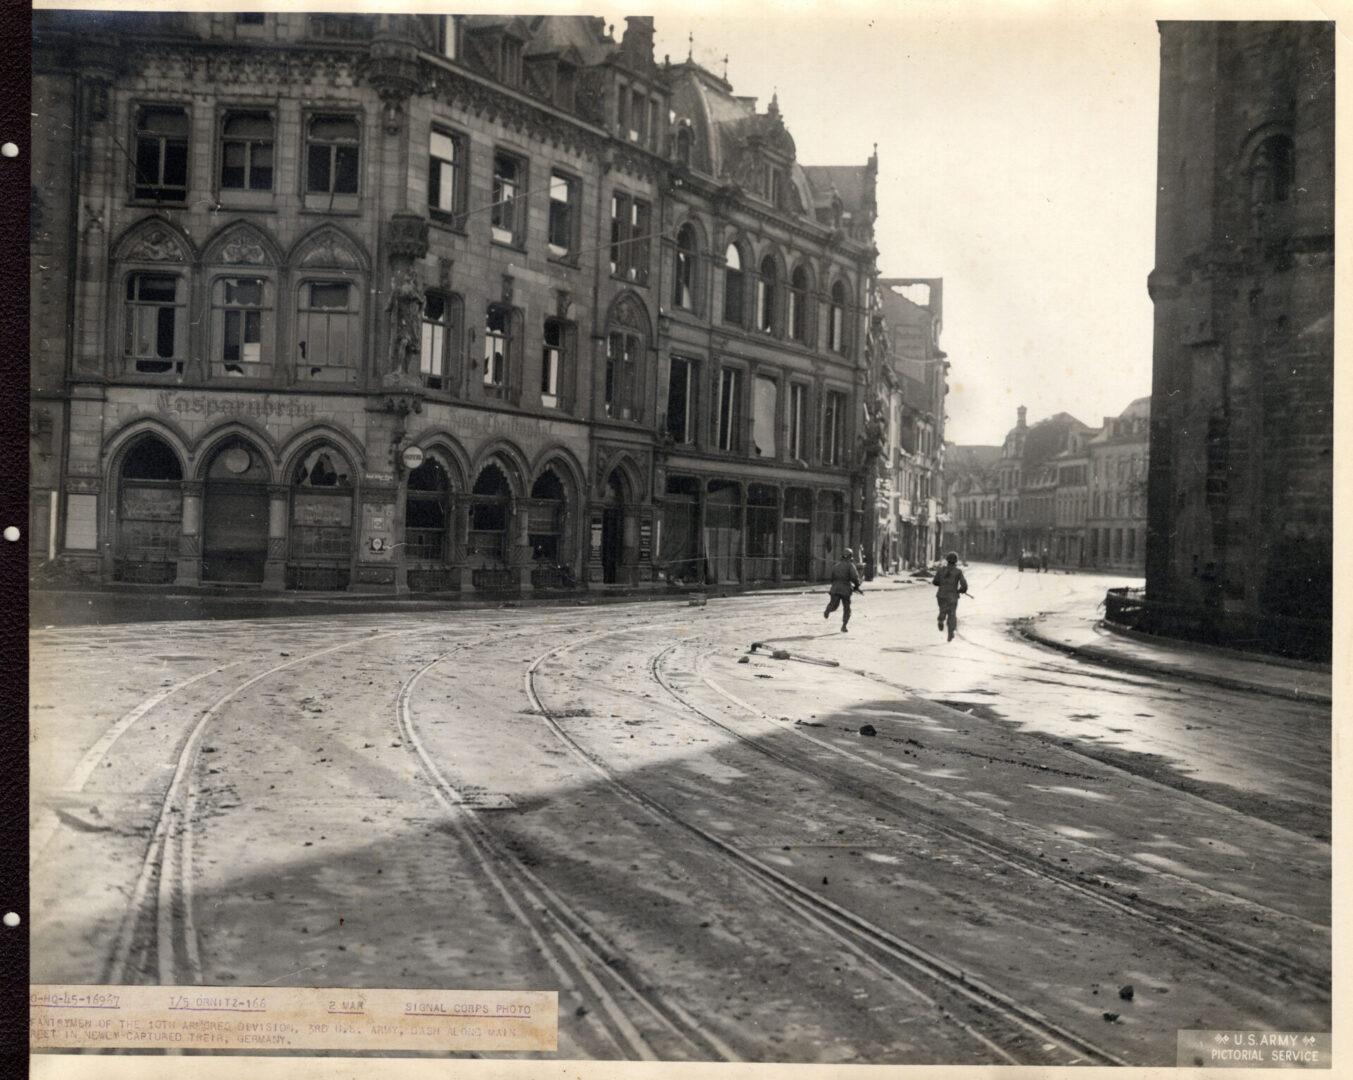 Infantrymen dash forward in the streets of Trier, Germany